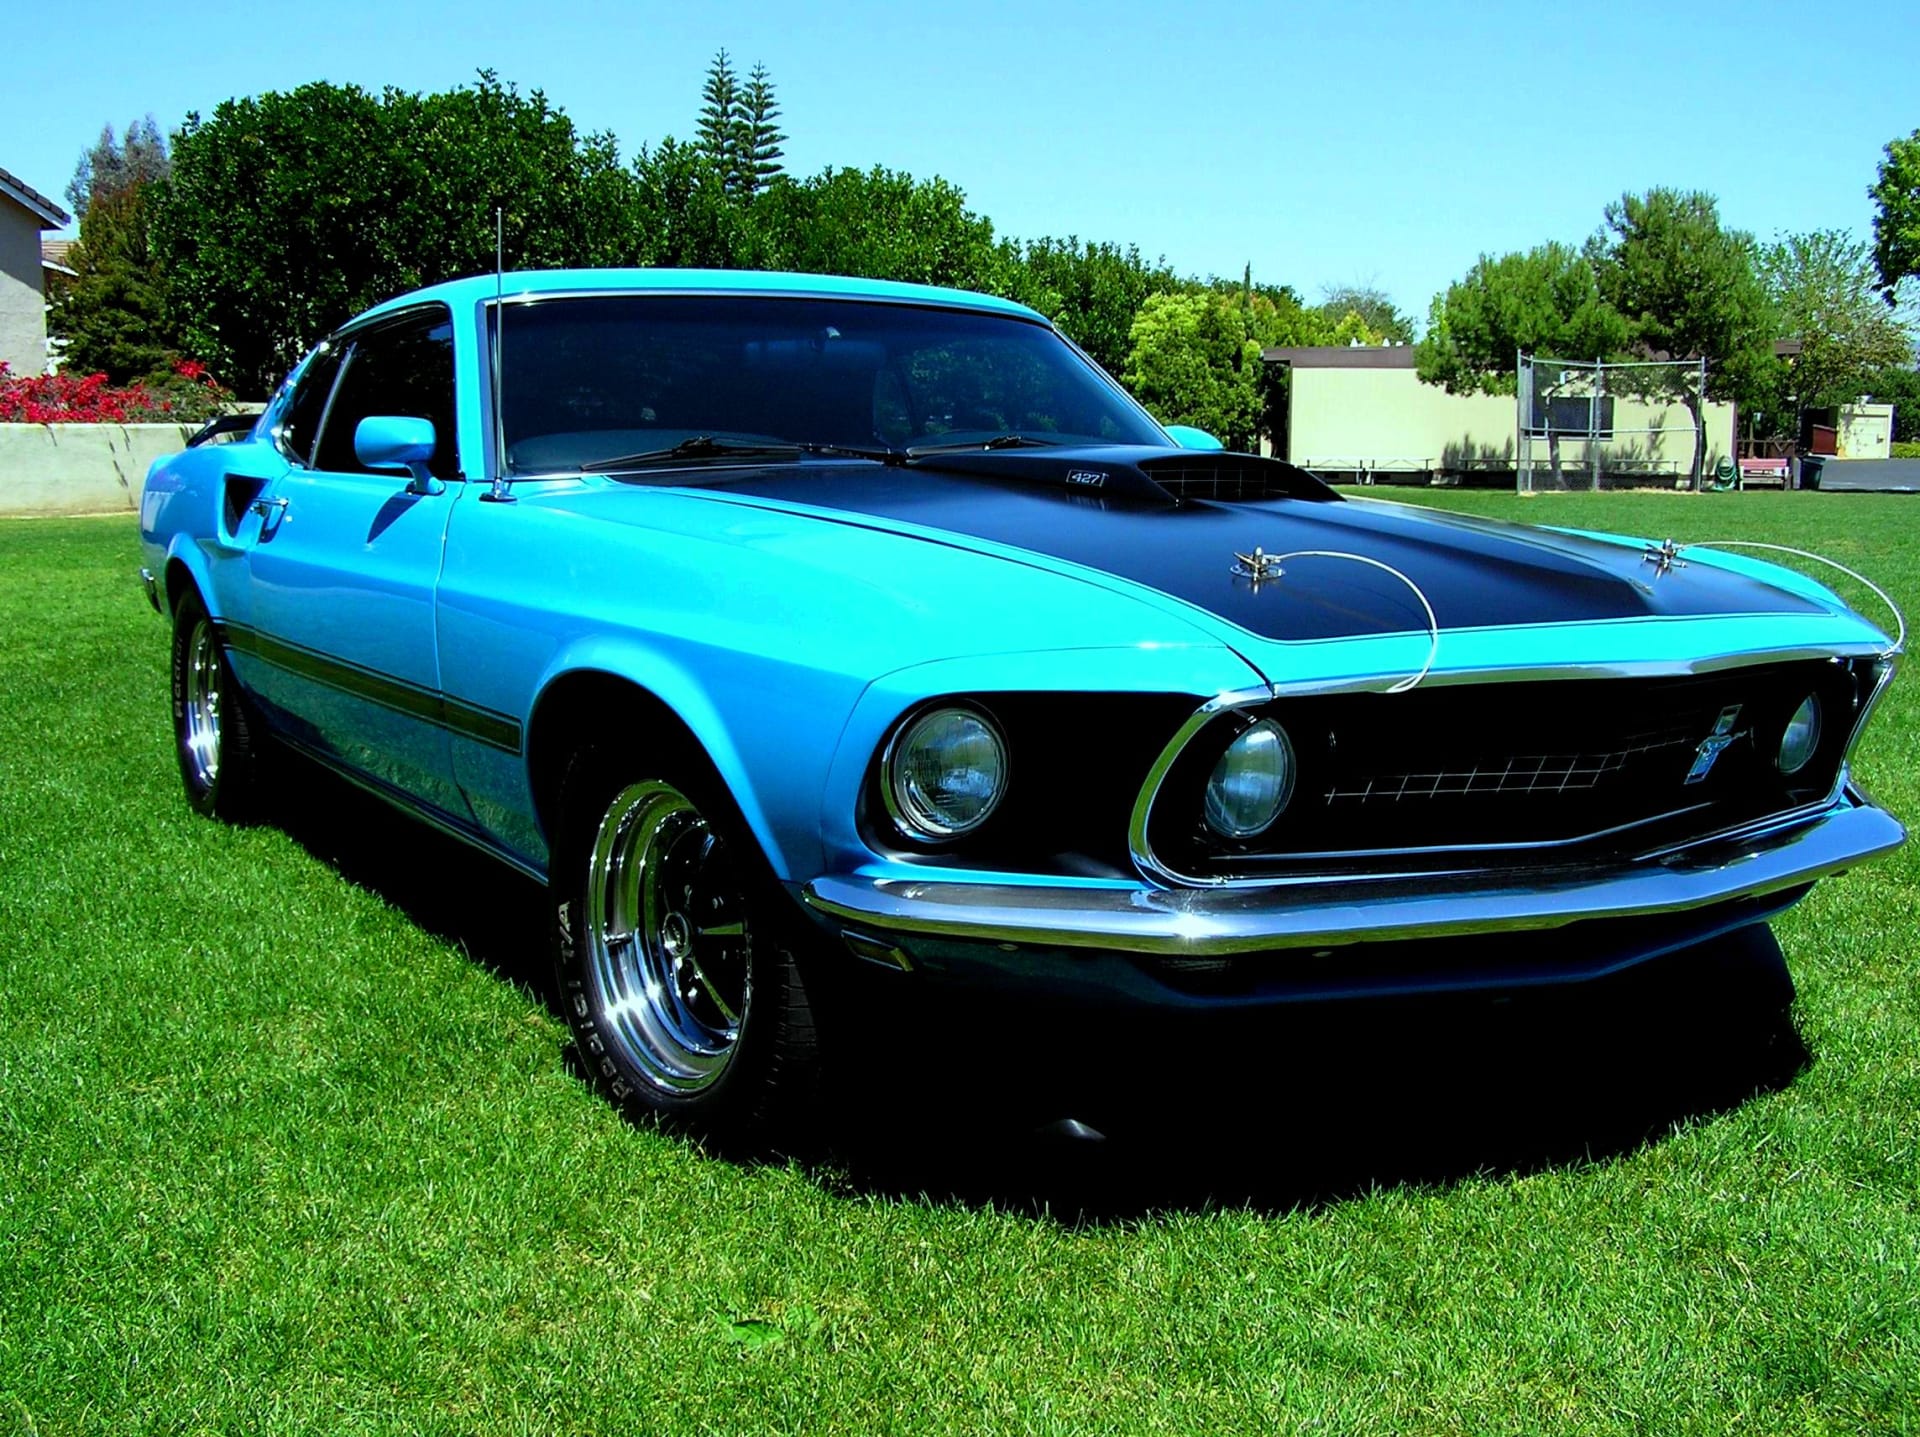 1969 Ford Mustang Mach 1 Fastback at Anaheim 2015 as F272 - Mecum Auctions